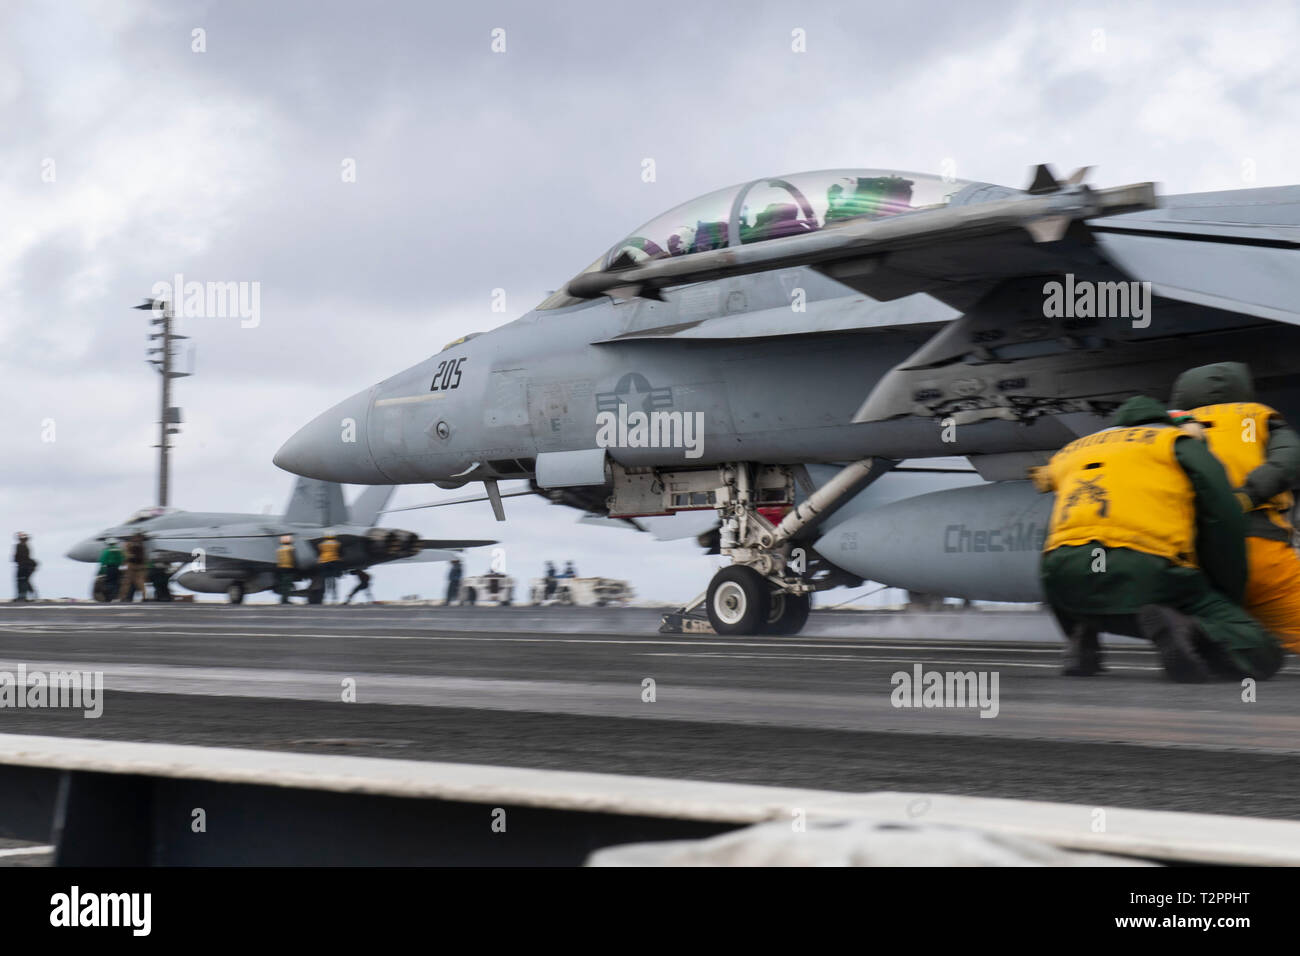 190402-N-IG466-0144  ATLANTIC OCEAN (April 2, 2019) An F/A-18F Super Hornet assigned to the Fighting Checkmates of Strike Fighter Squadron (VFA) 211 launches from the Nimitz-class aircraft carrier USS Harry S. Truman (CVN 75). Harry S. Truman is underway conducting a sustainment exercise with Carrier Strike Group (CSG) 8 ships and squadrons to maintain qualifications and a deployment-ready status. (U.S. Navy photo by Mass Communication Specialist 3rd Class Adelola Tinubu/Released) Stock Photo